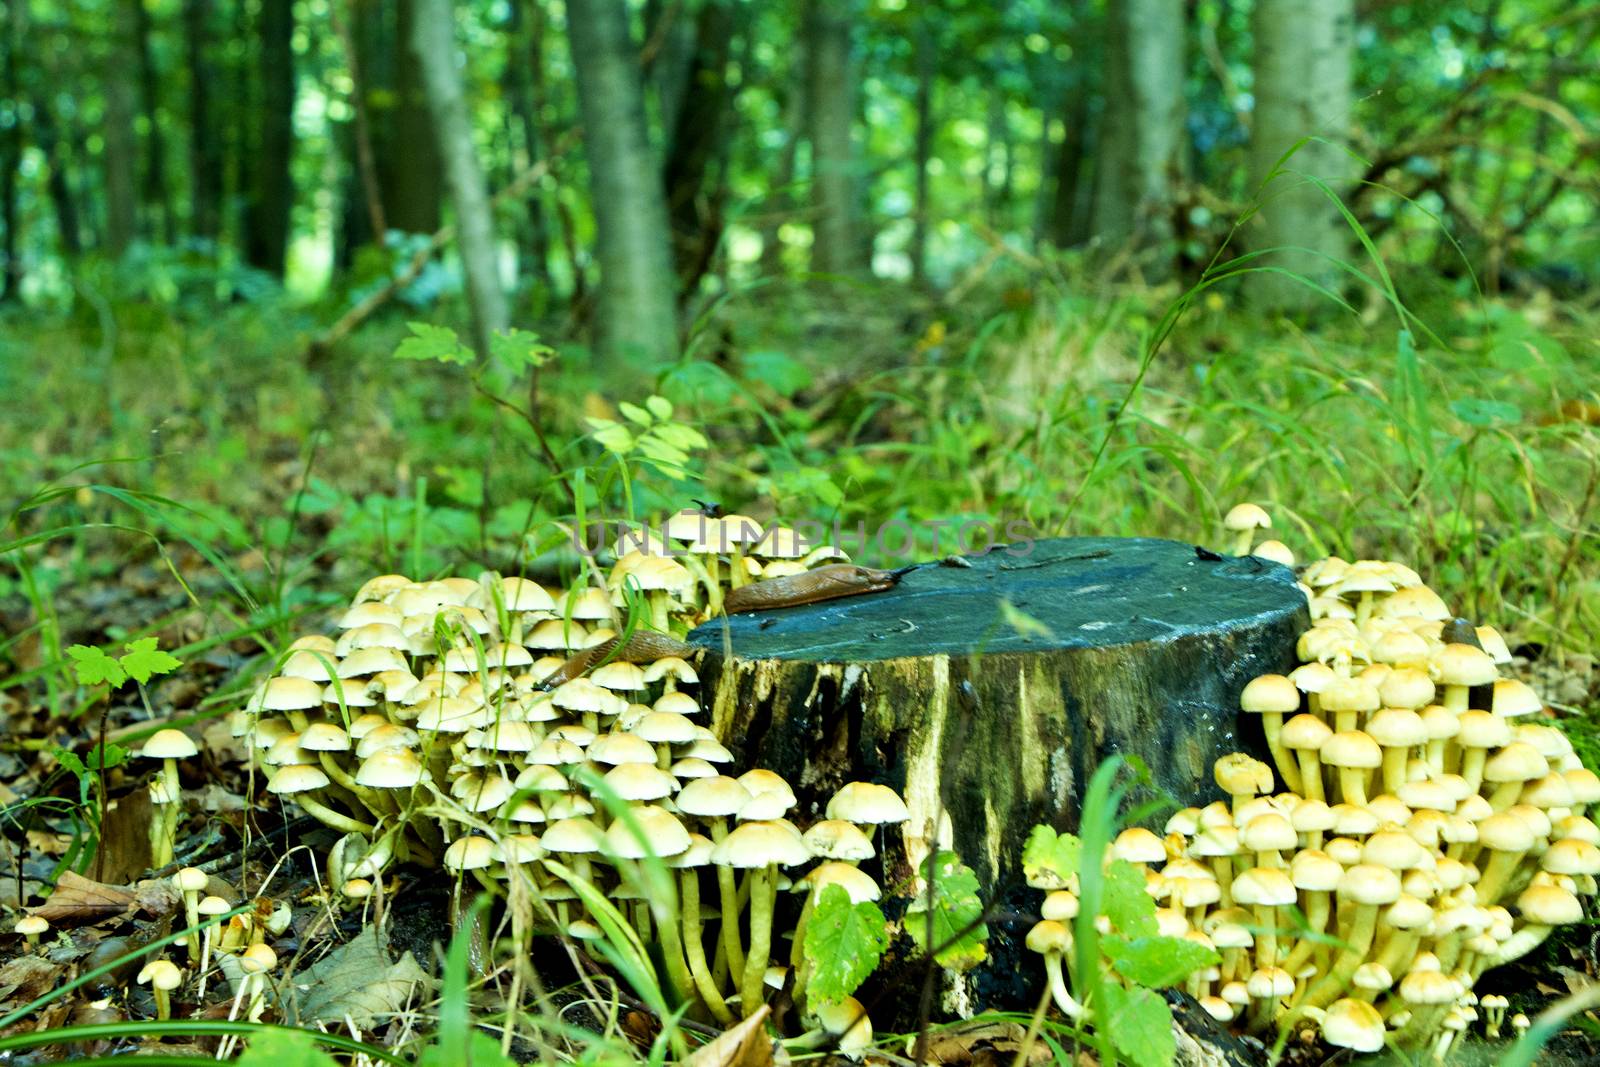 Dark tree trunk with small bright mushrooms surrounded by green forest.